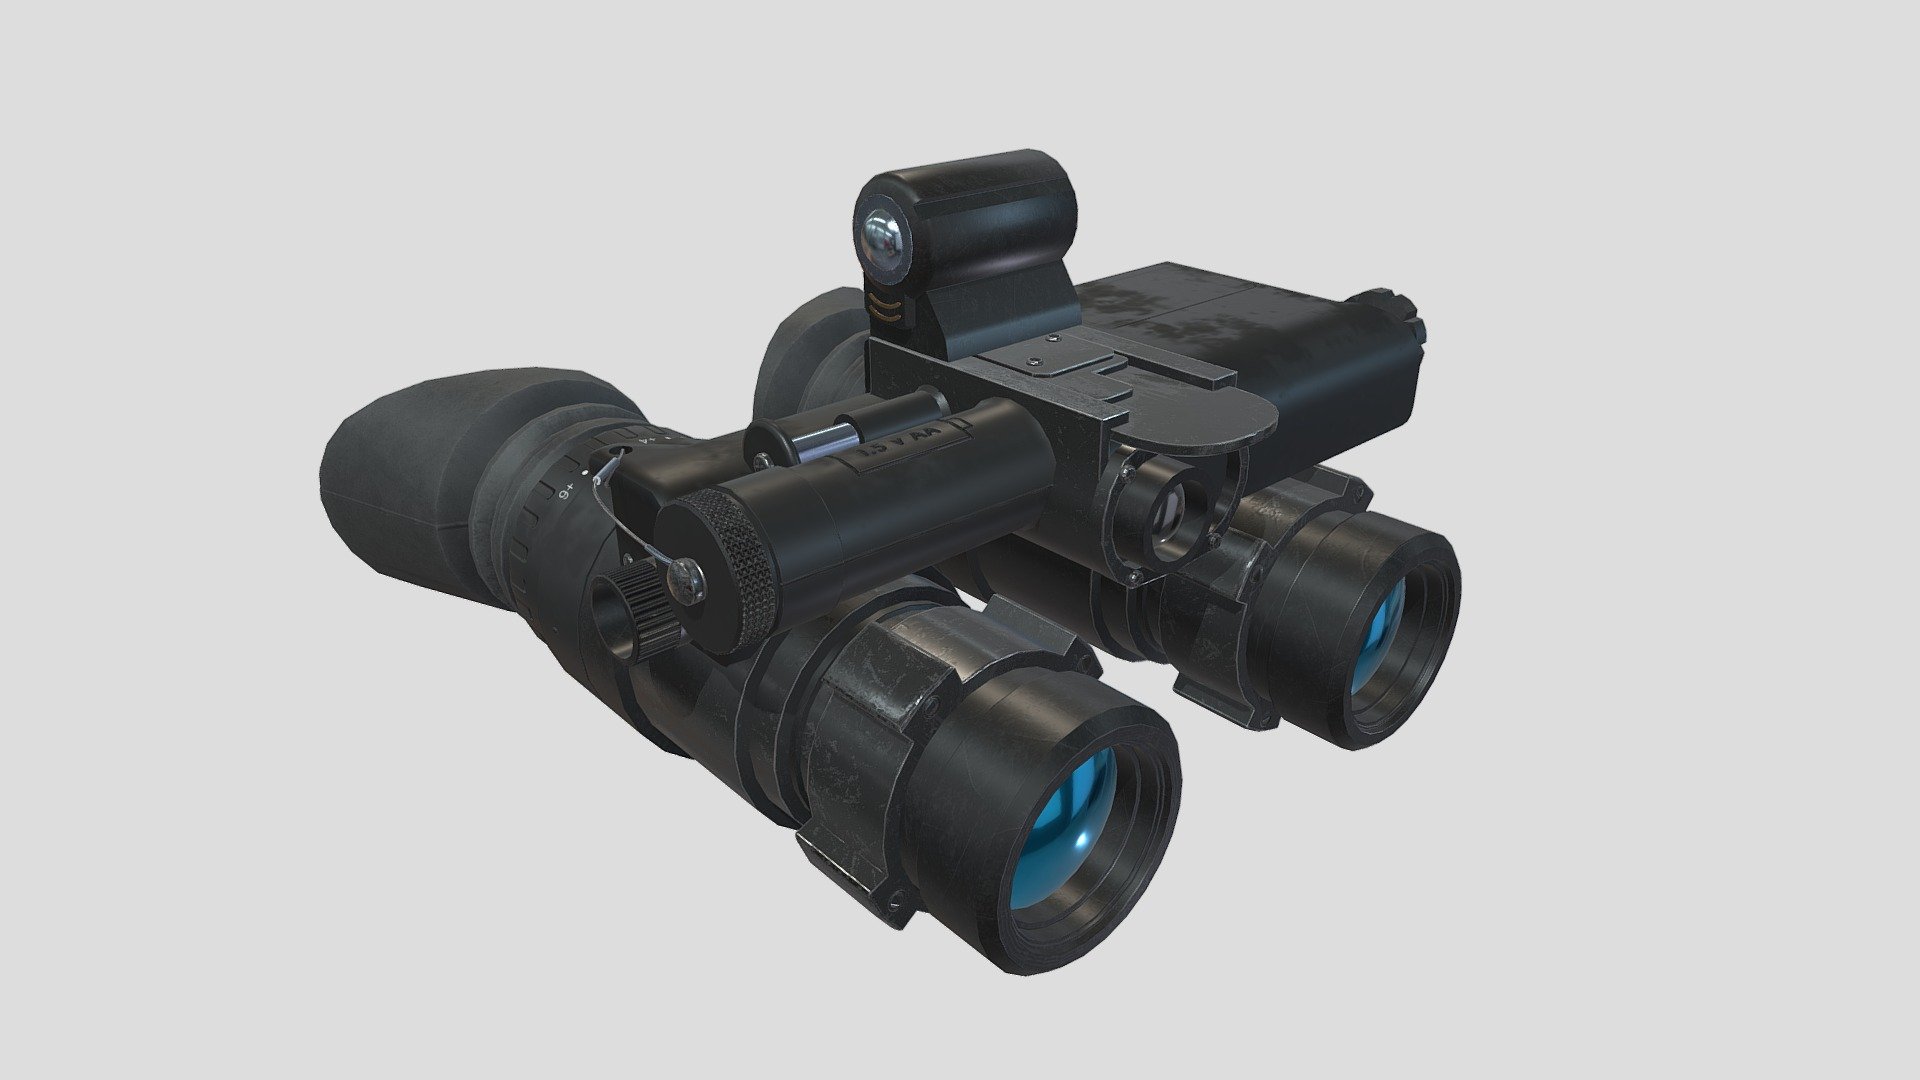 AN-PVS-23 Night vision goggles 3D model. Model is created in 3D studio Max and textured in Substance painter.
You can download .obj and .fbx format 3d model